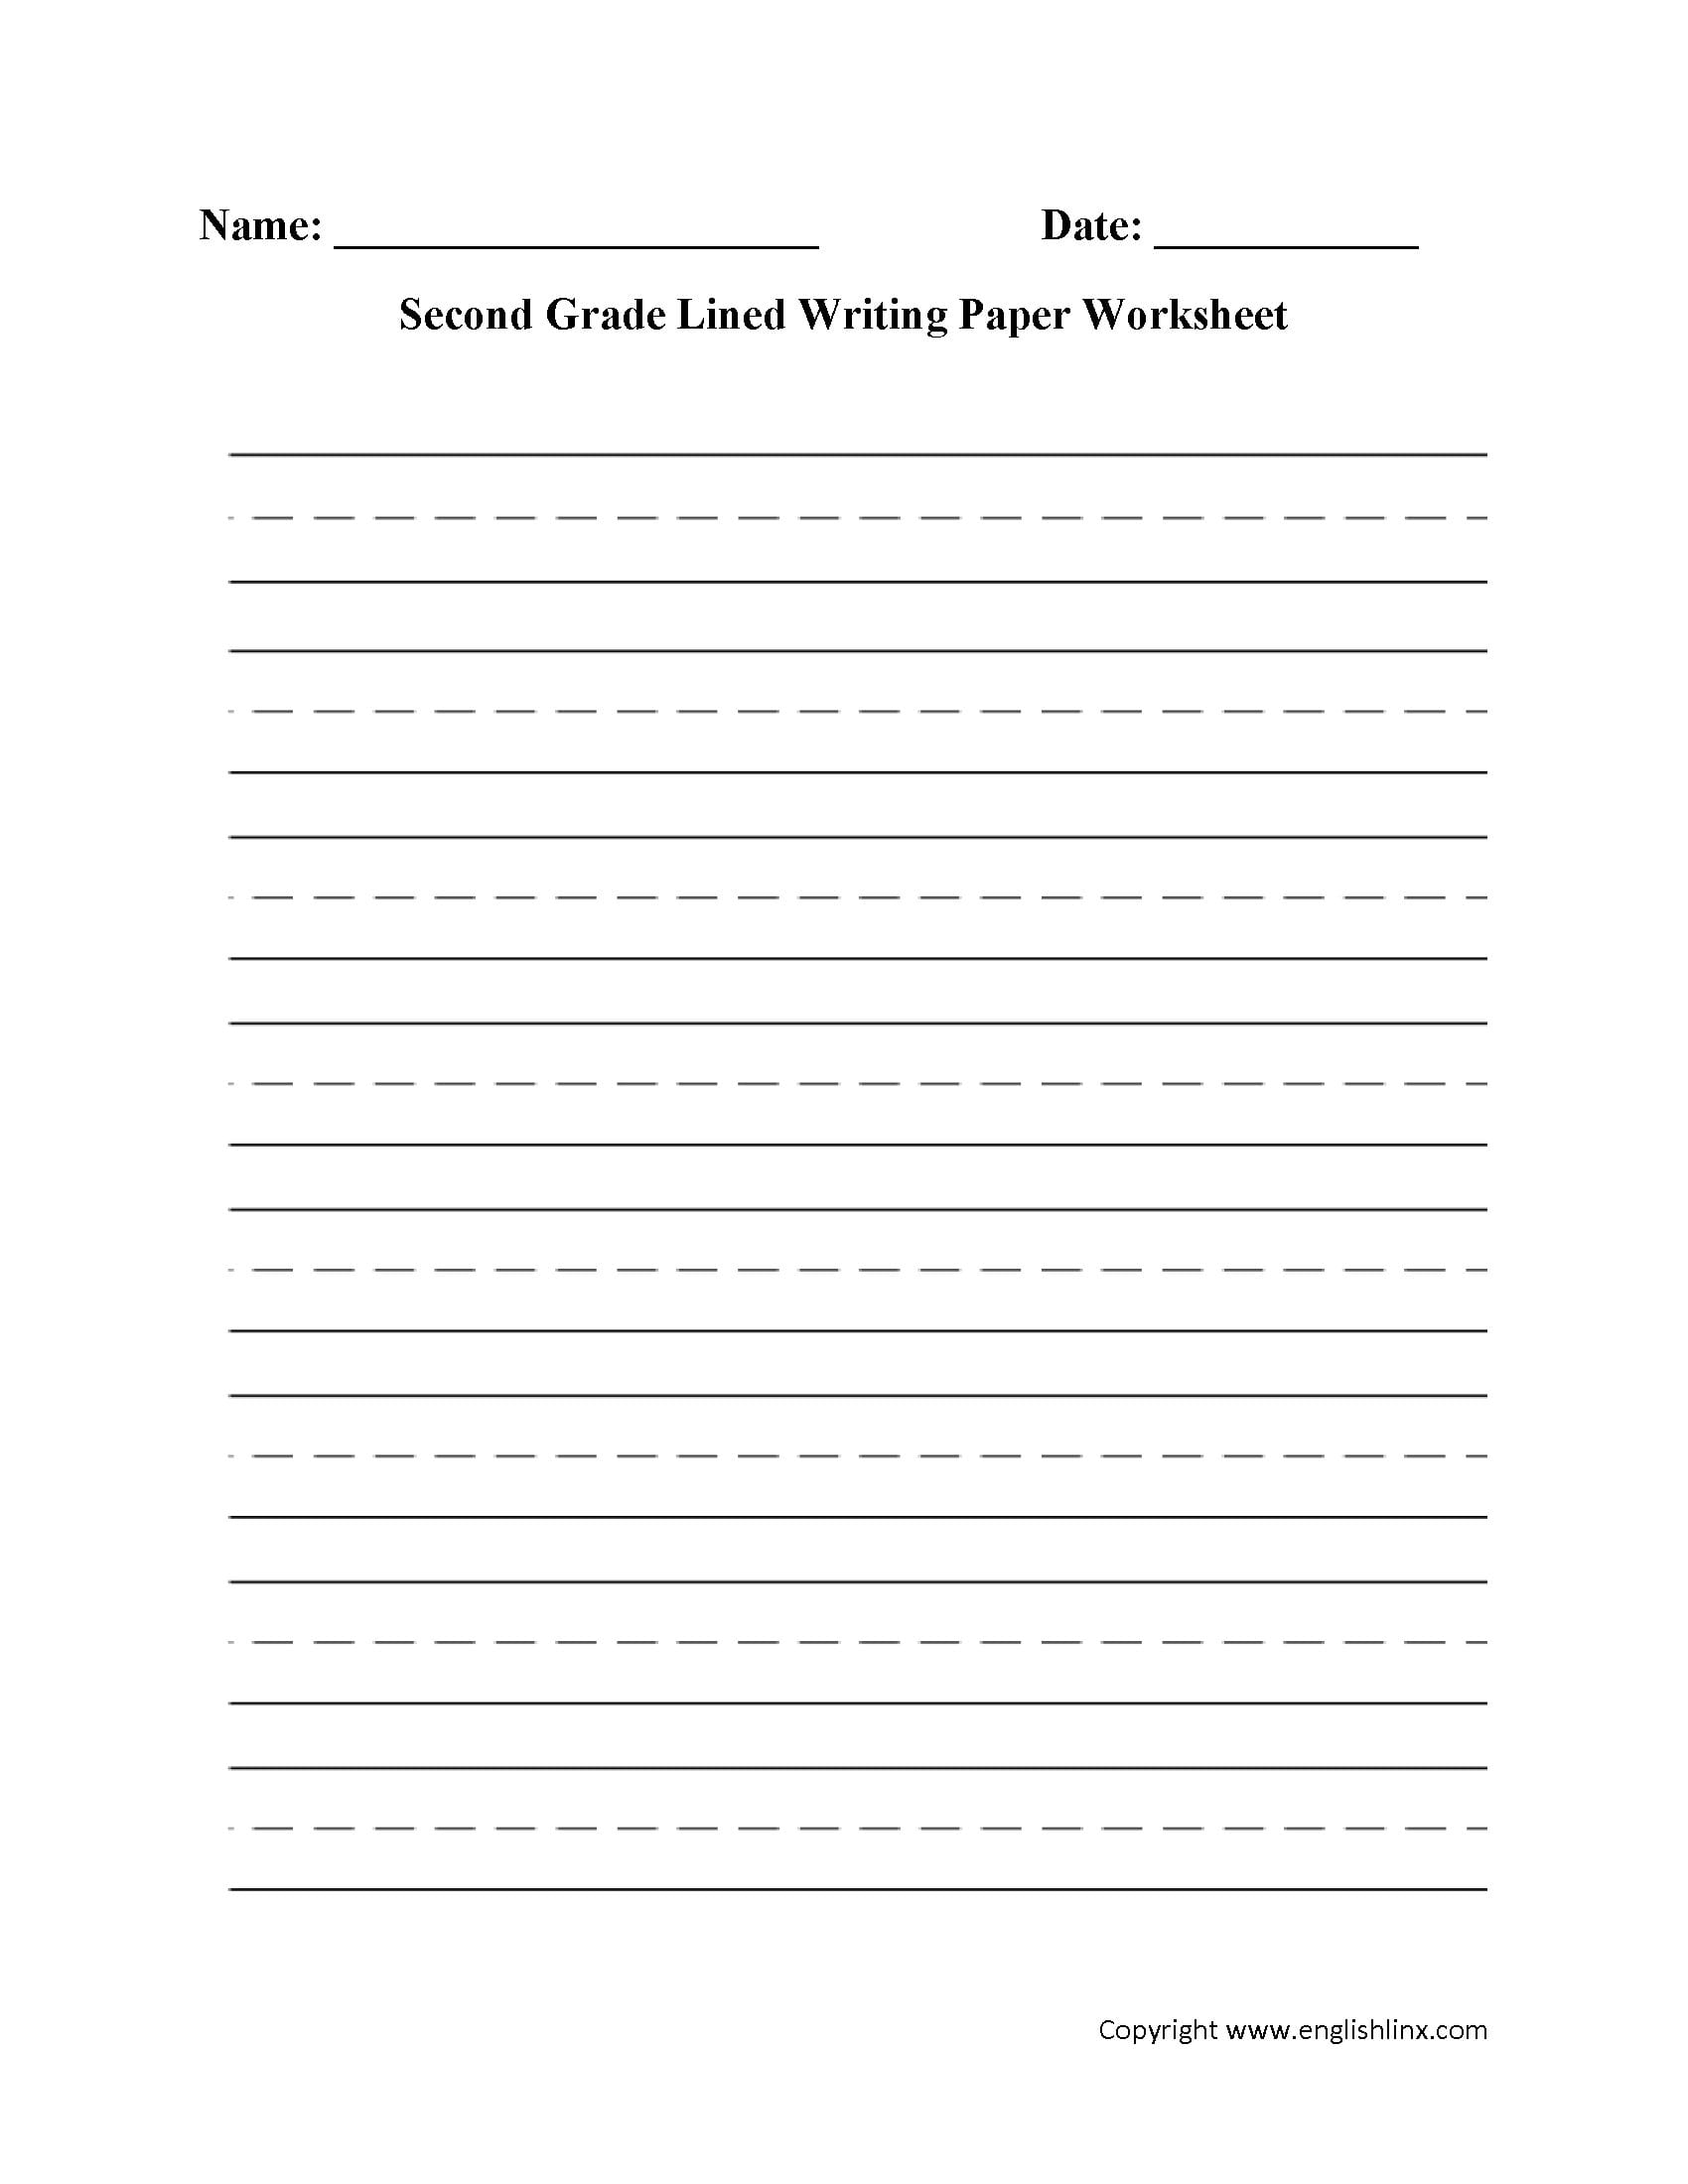 Lined Writing Paper For 2Nd Grade  Floss Papers